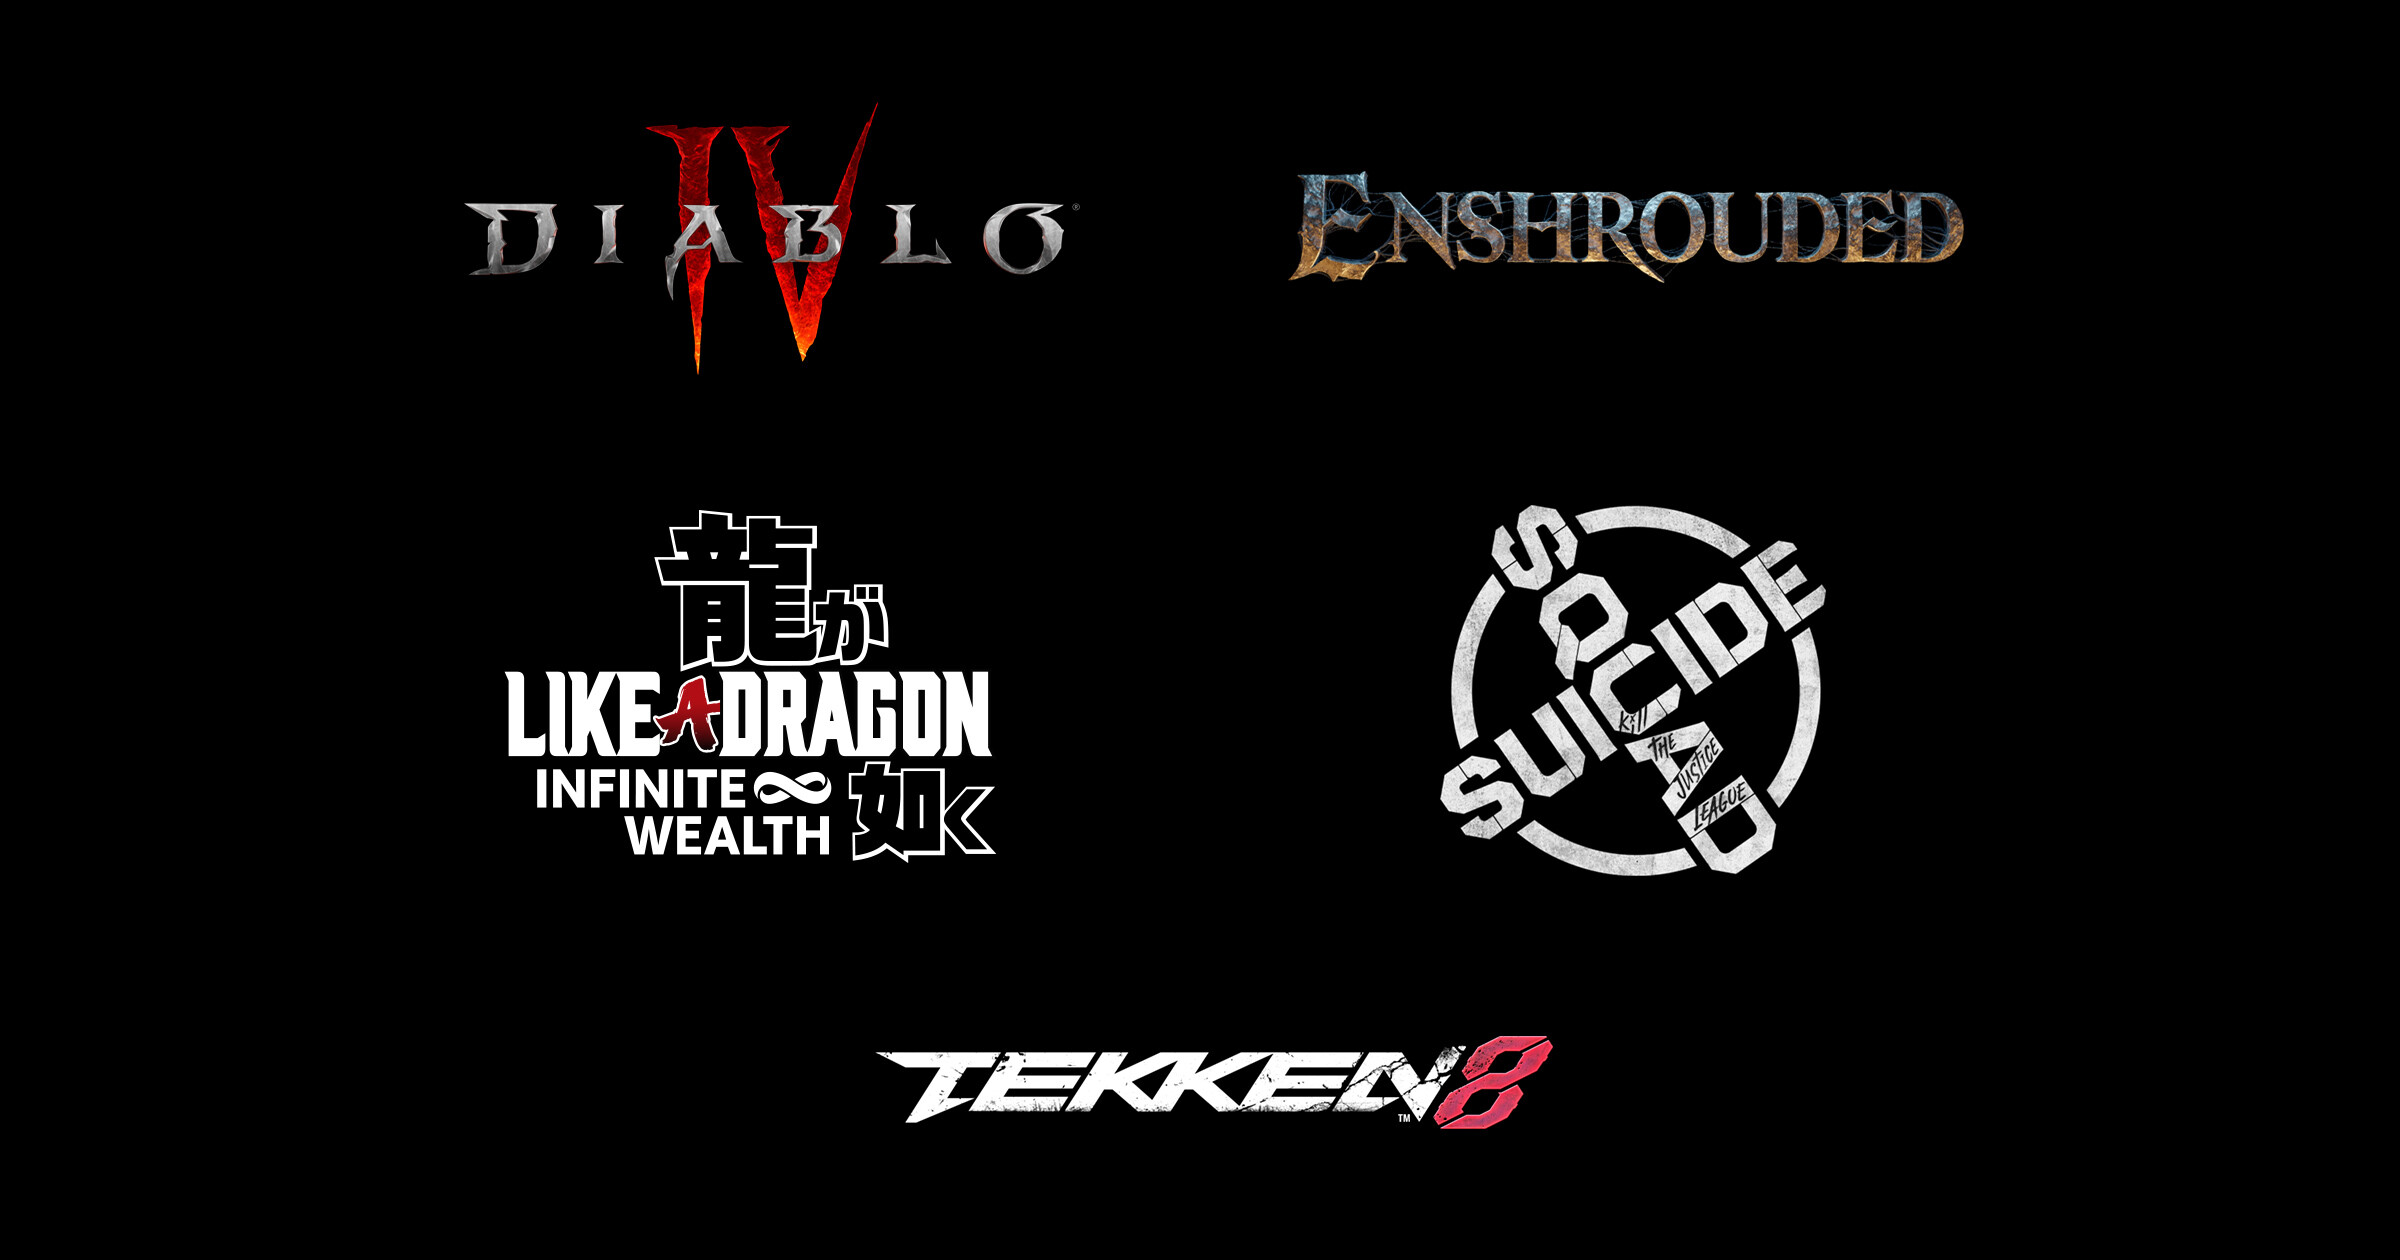 NVIDIA DLSS Expansion: TEKKEN 8, Dragon: Infinite Wealth, and More Games Included